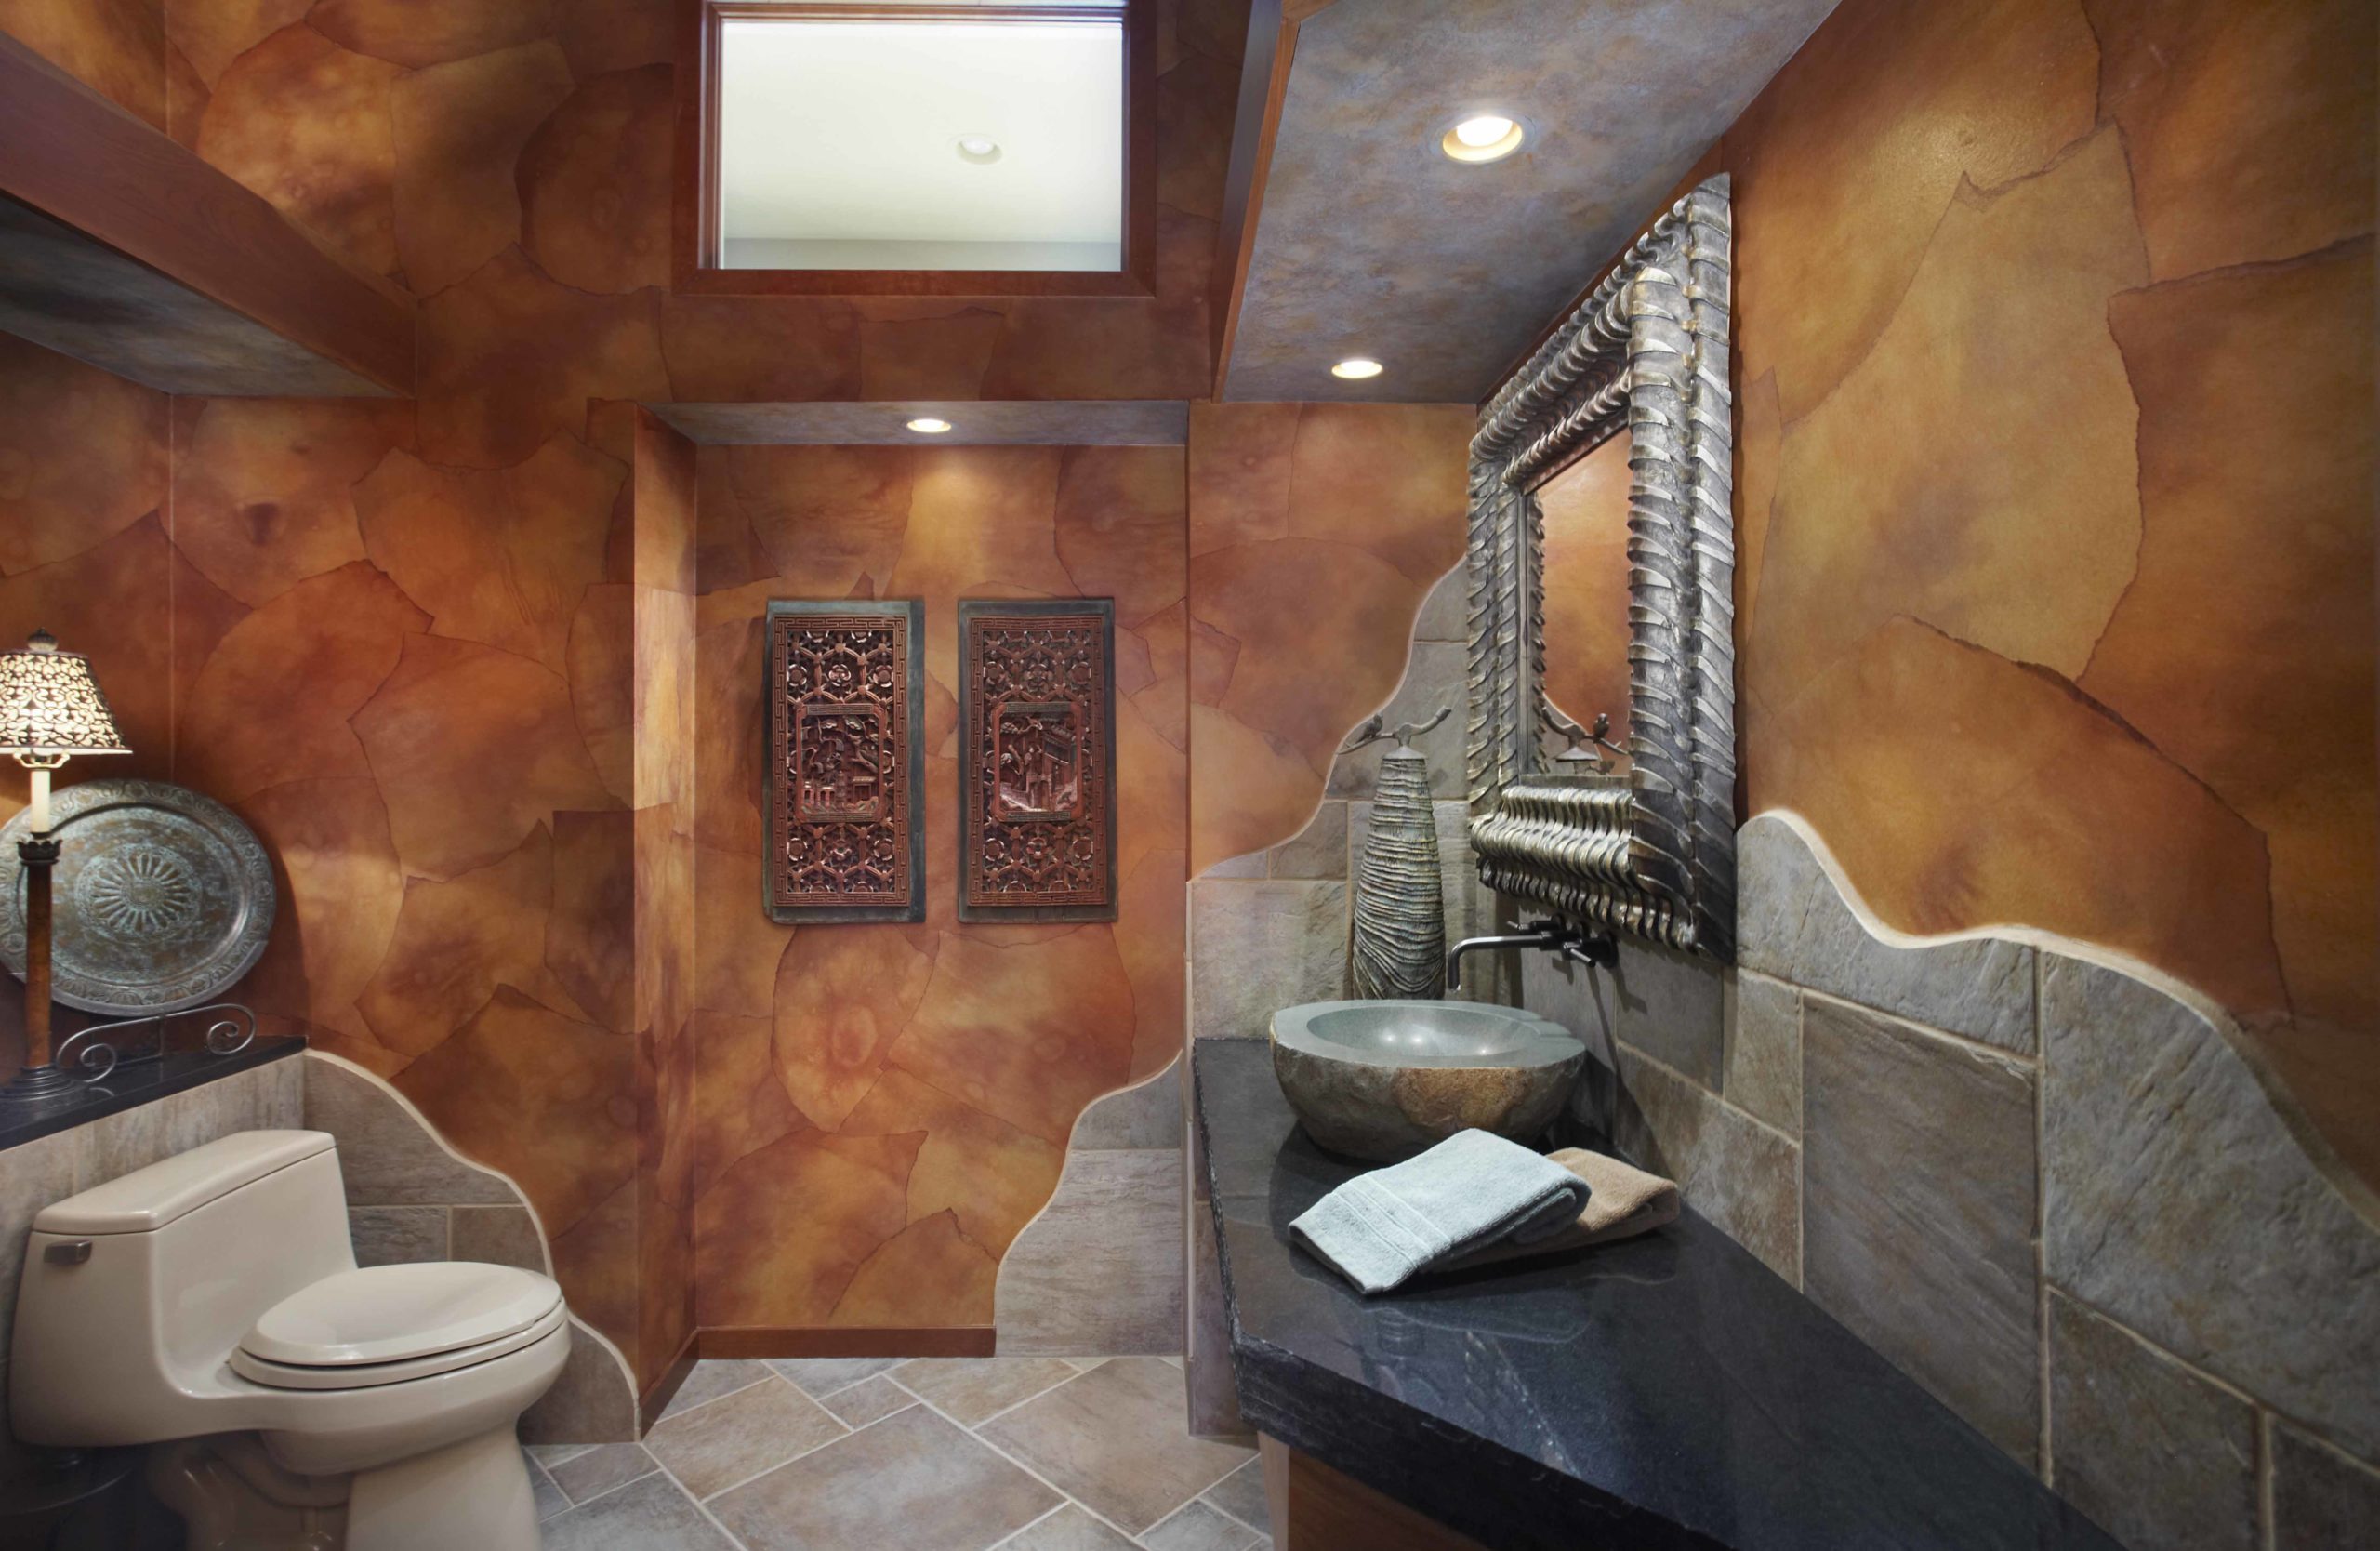 Bathroom with brown stone walls and indigenous art on the walls